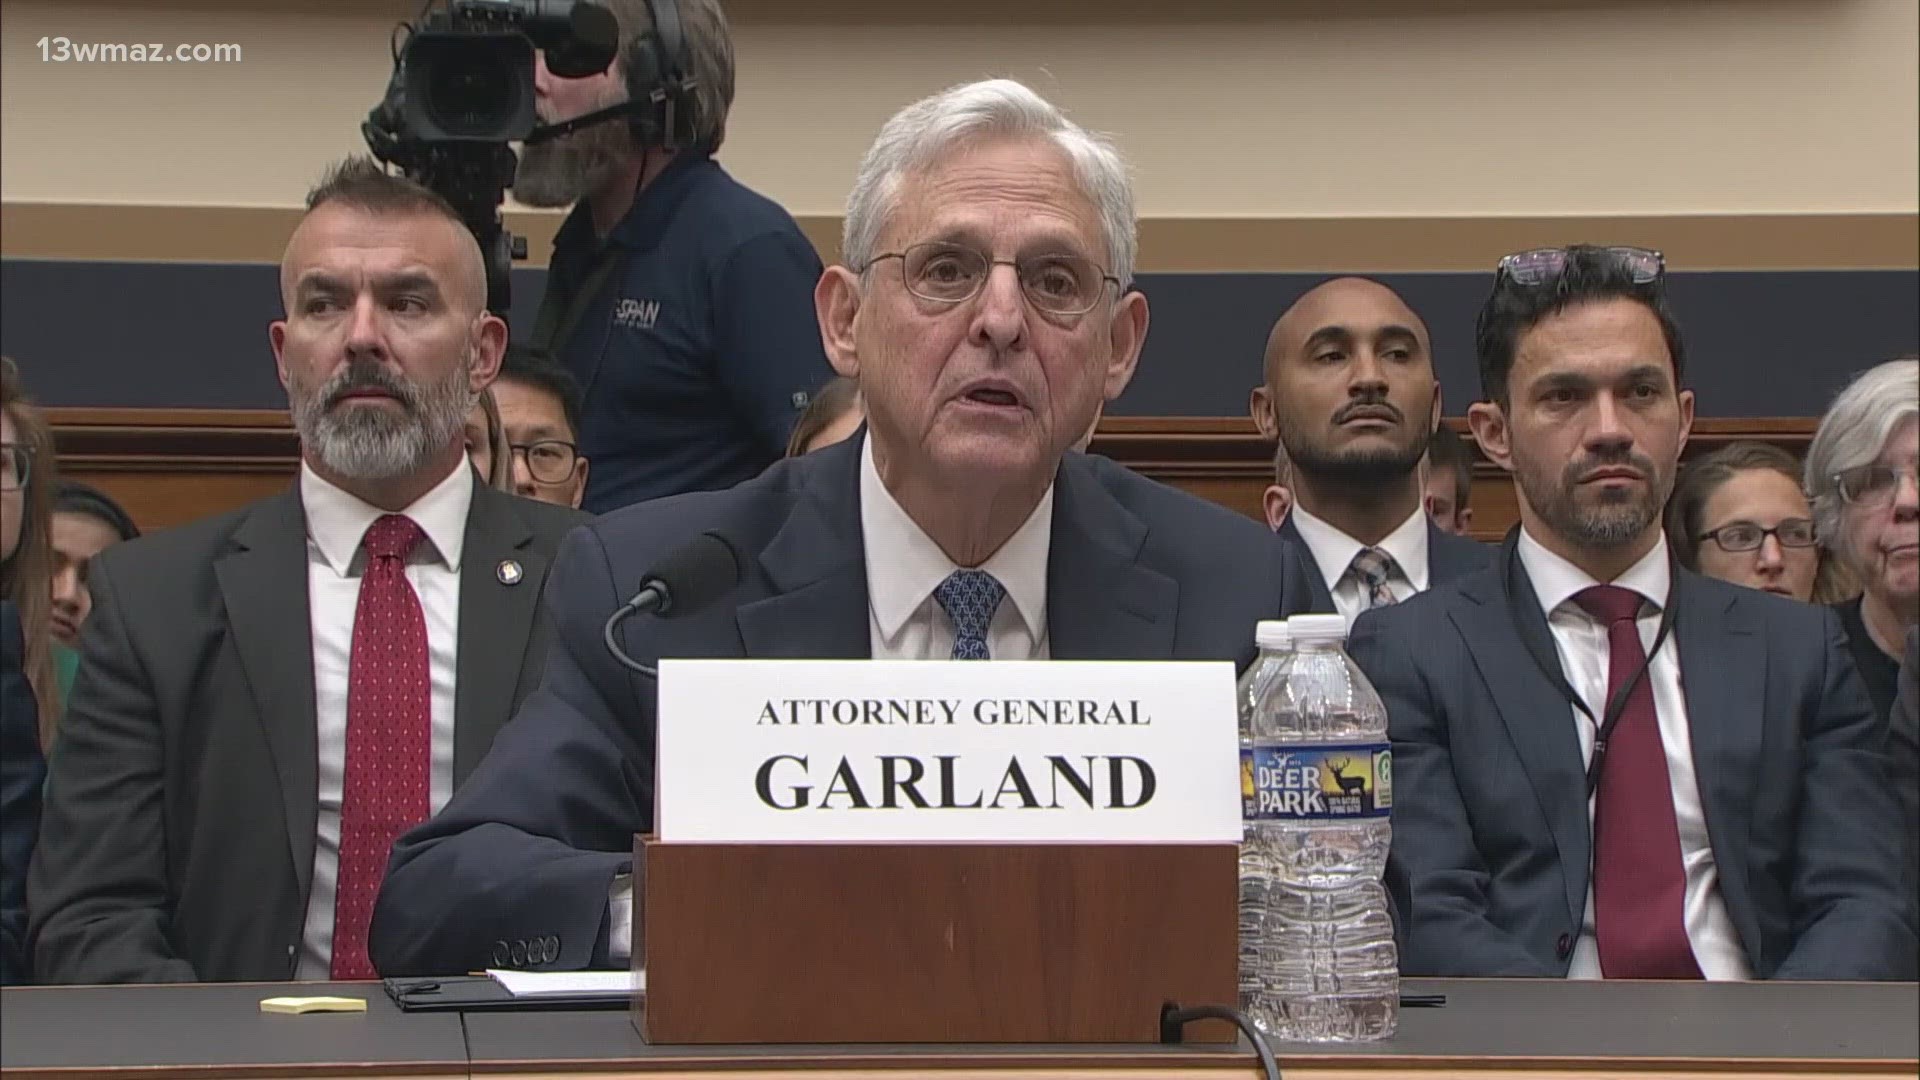 Garland — carefully and deliberately — defended the country’s largest law enforcement agency against Republican attacks during the hearing.